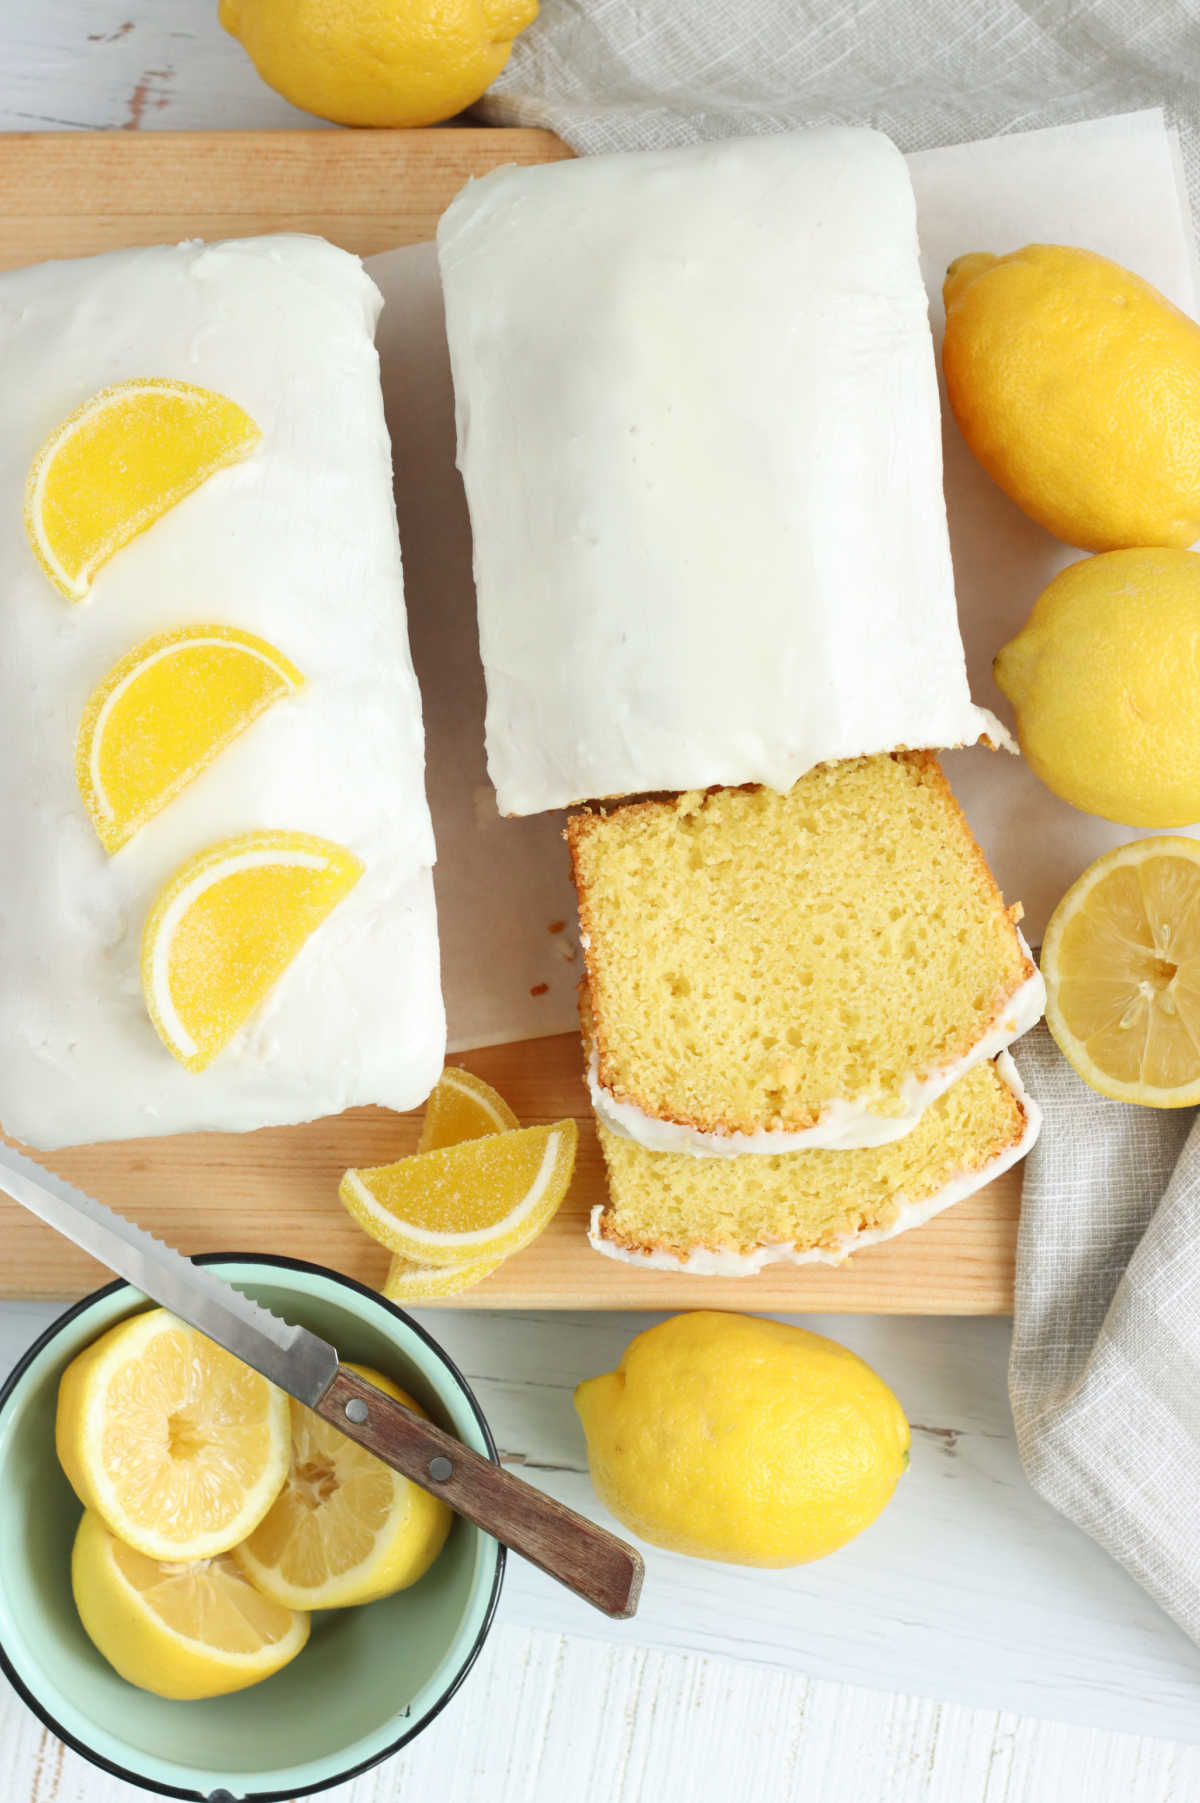 Two loaves of lemon cake, one partially sliced on wooden cutting board, fresh lemons.